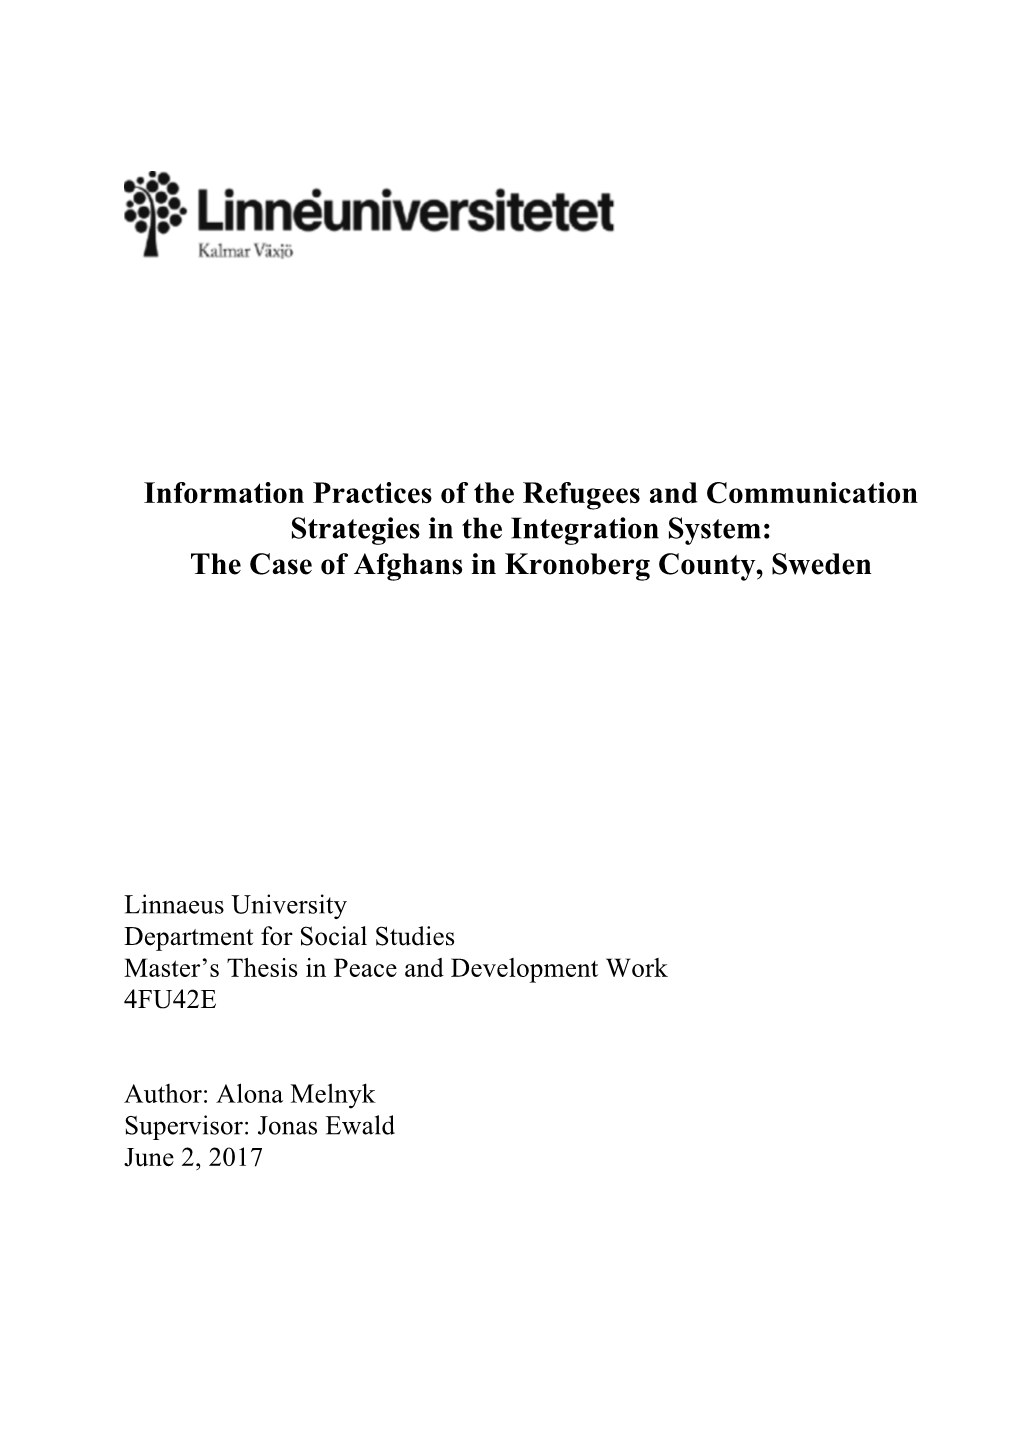 Information Practices of the Refugees and Communication Strategies in the Integration System: the Case of Afghans in Kronoberg County, Sweden